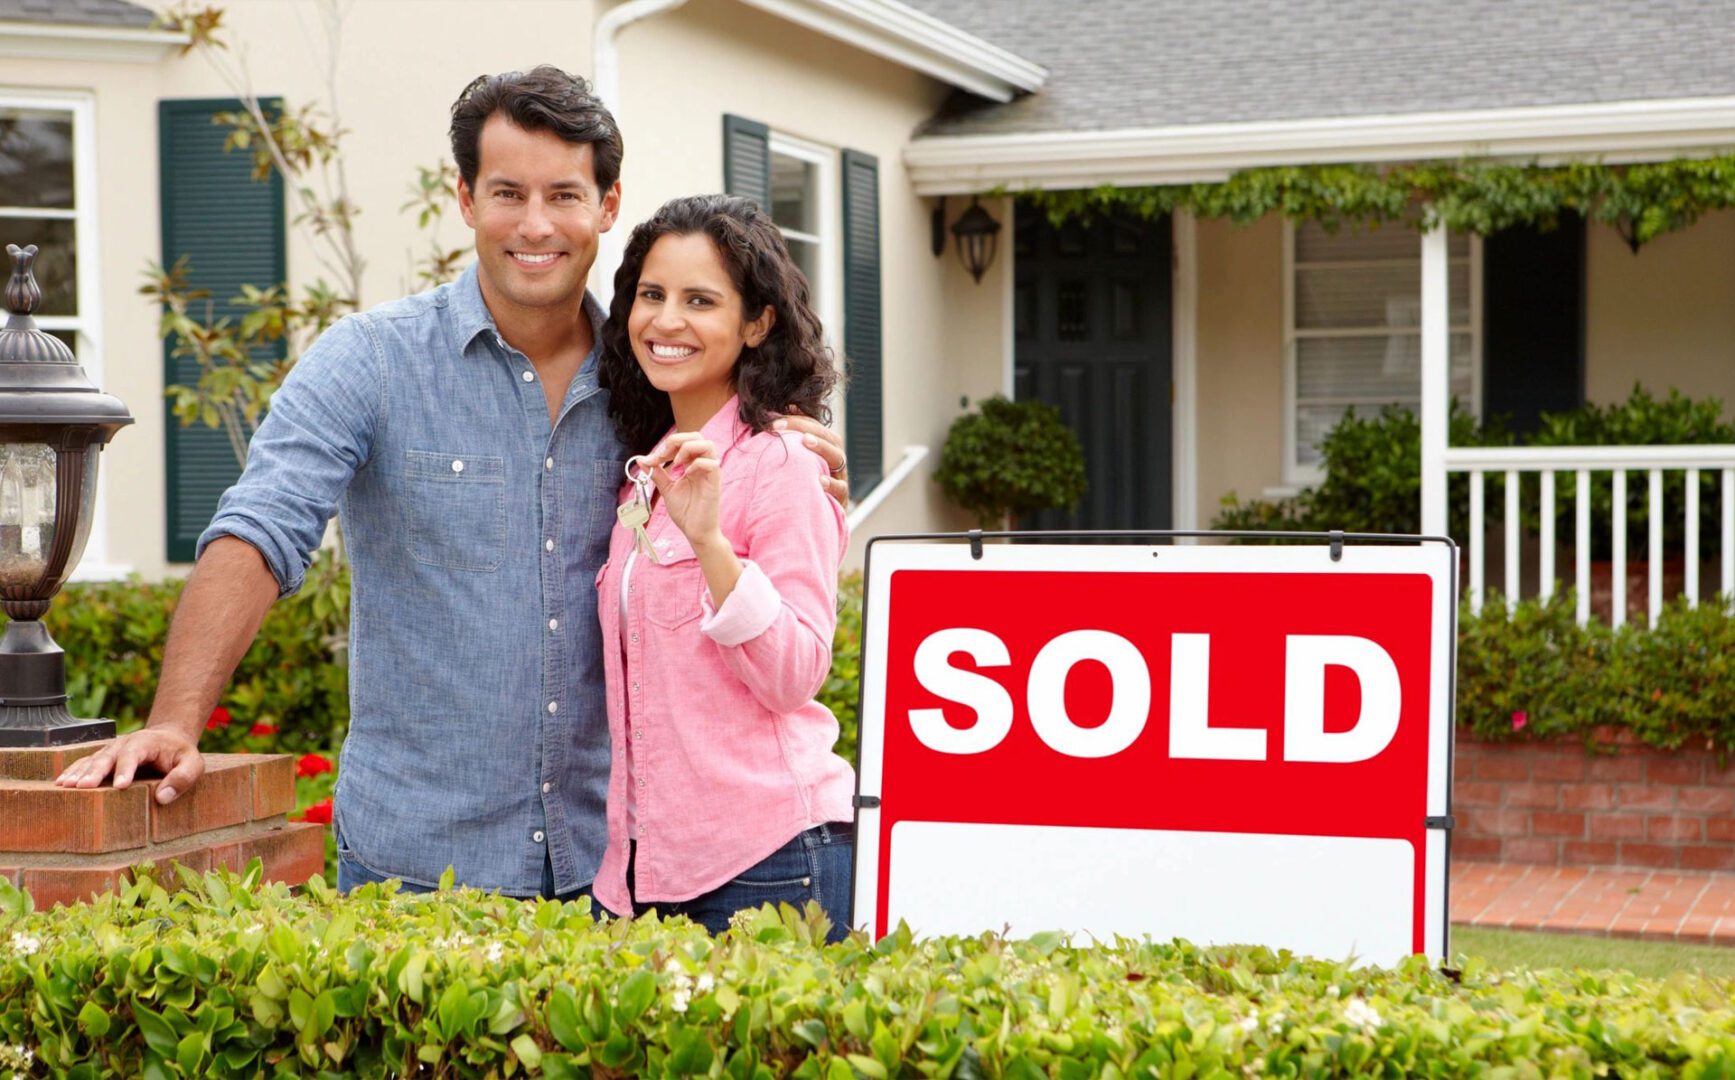 Happy couple outside home with sold sign